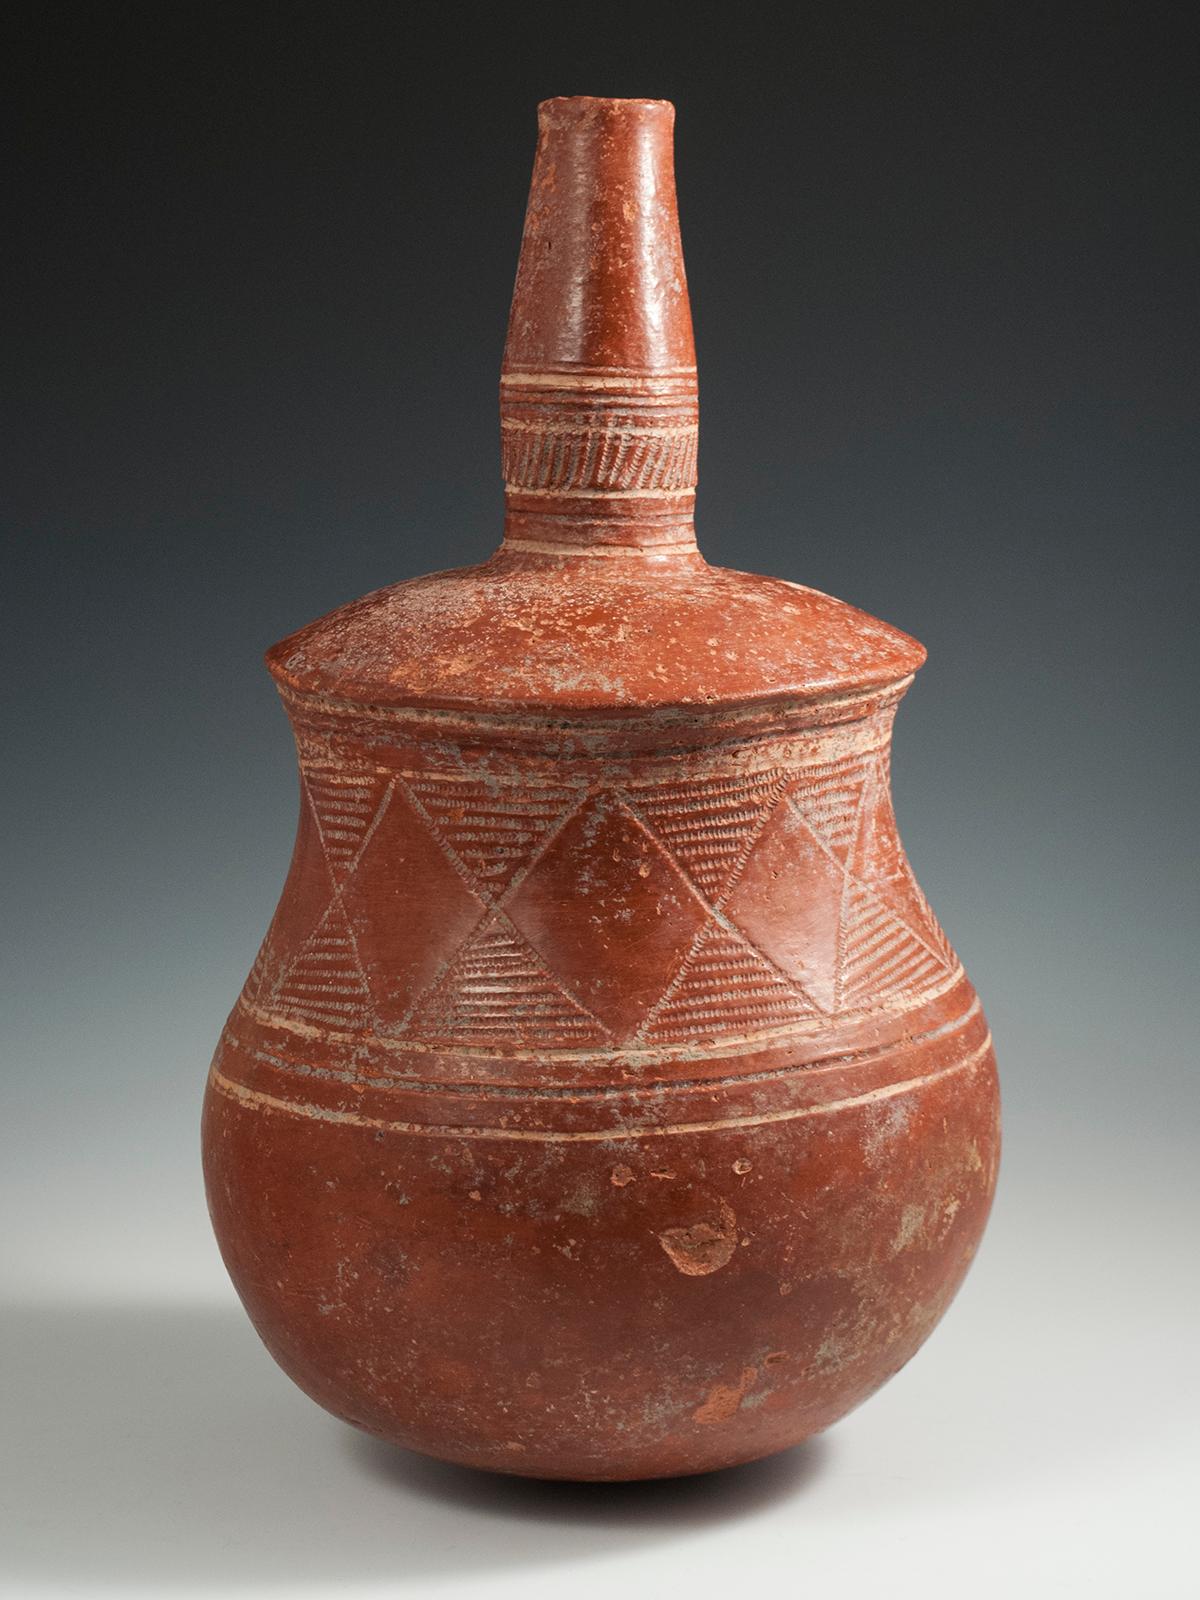 Late 19th-Early 20th century tribal terracotta bottle, Djenne Area, Mali

A handsome terracotta bottle from the Djenne area of Mali with incised geometric patterns on the globular body and incised rings around the neck. There are a few rim chips